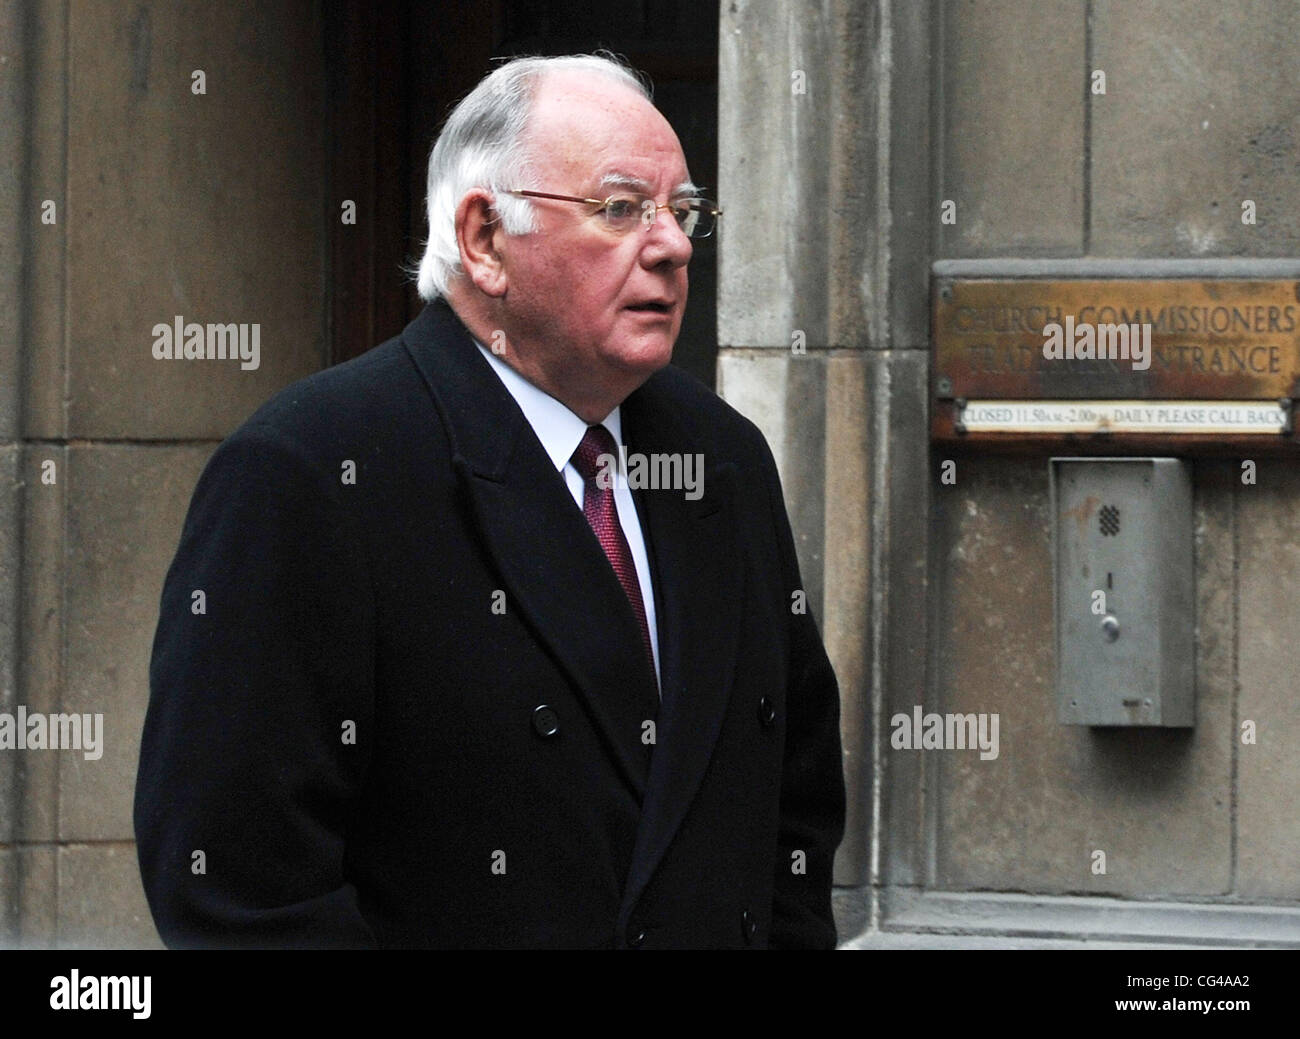 Former Speaker of the House of Commons Michael Martin out and about in Westminster. London, England - 26.01.11 Stock Photo